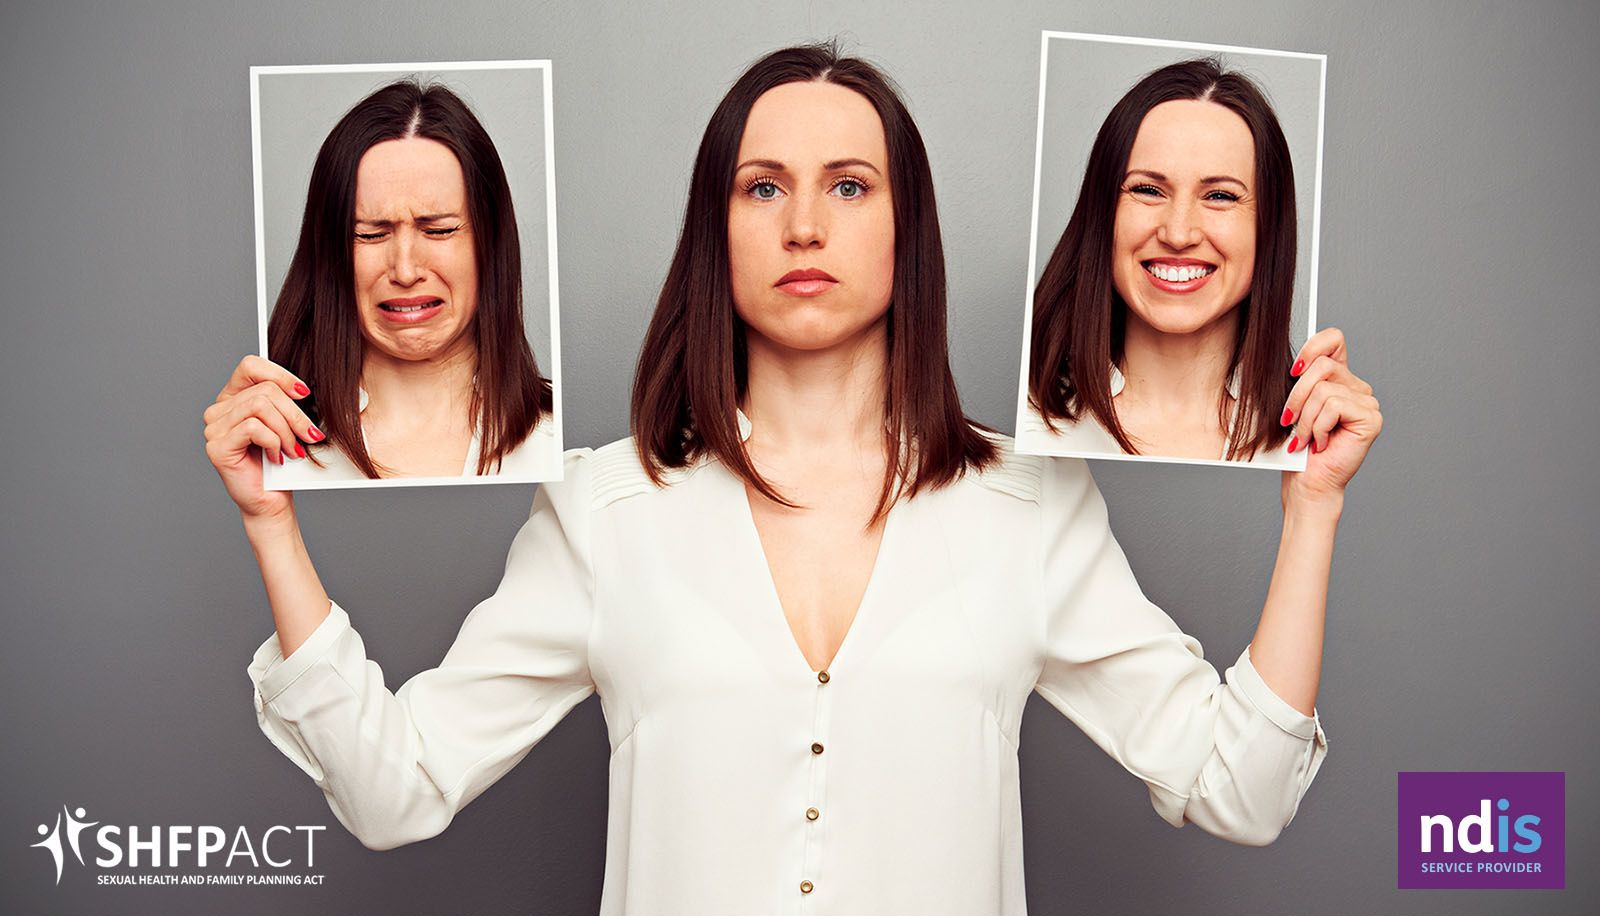 Woman holding up photos of herself with different emotional states.